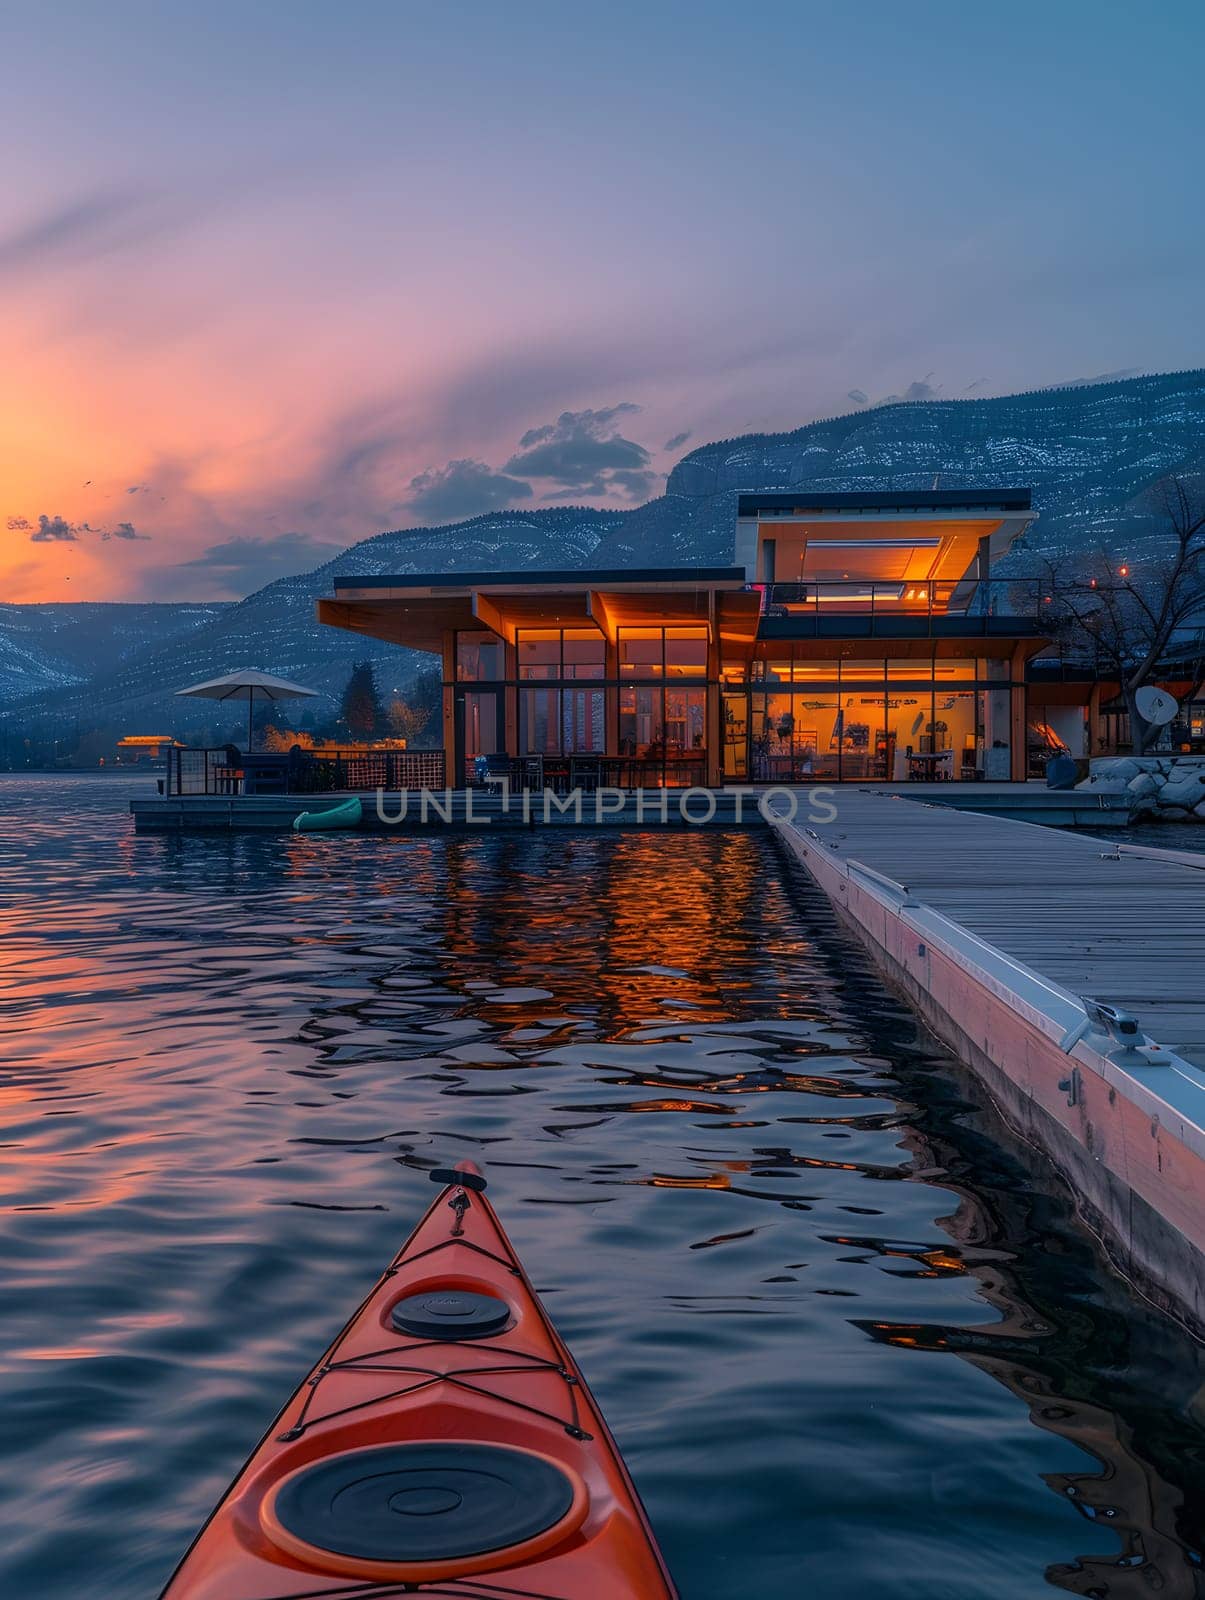 A kayak is moored at a lake dock under a colorful sunset sky with clouds, surrounded by nature and other boats, creating a serene watercraft scene